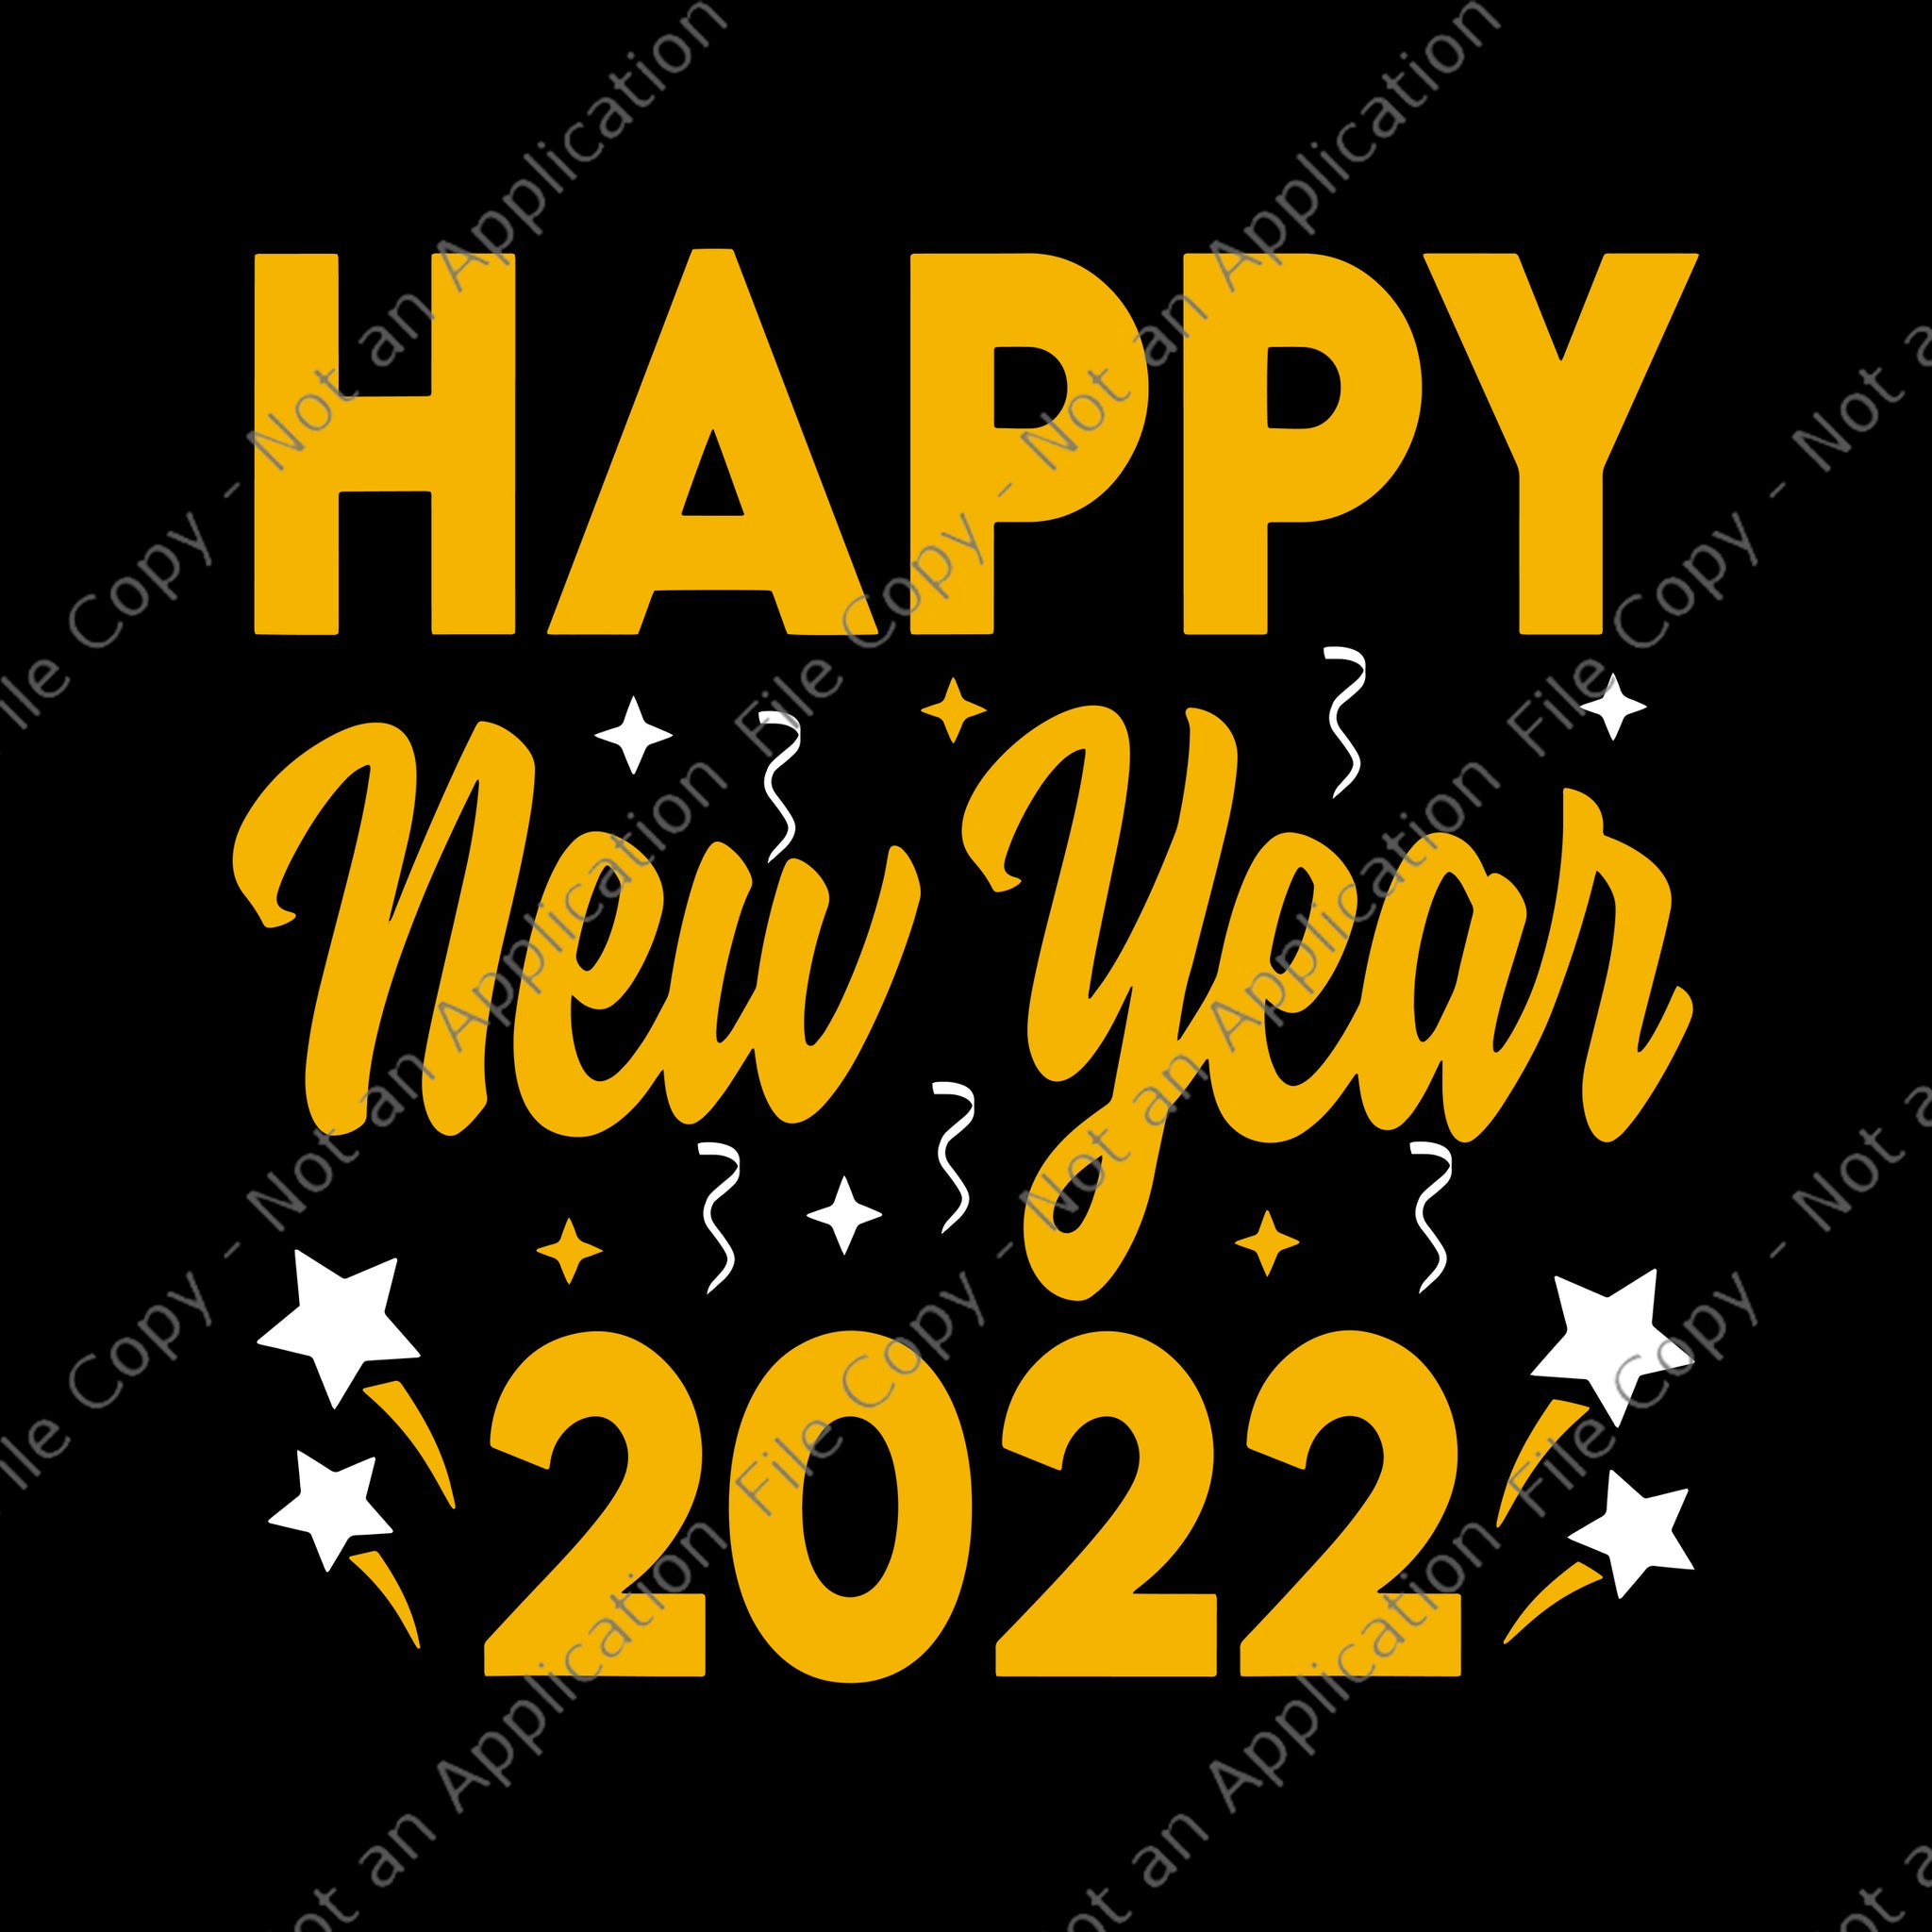 Happy New Year 2022 Svg, 2022 Svg, Funny Happy New Year Svg, Happy New Year Svg